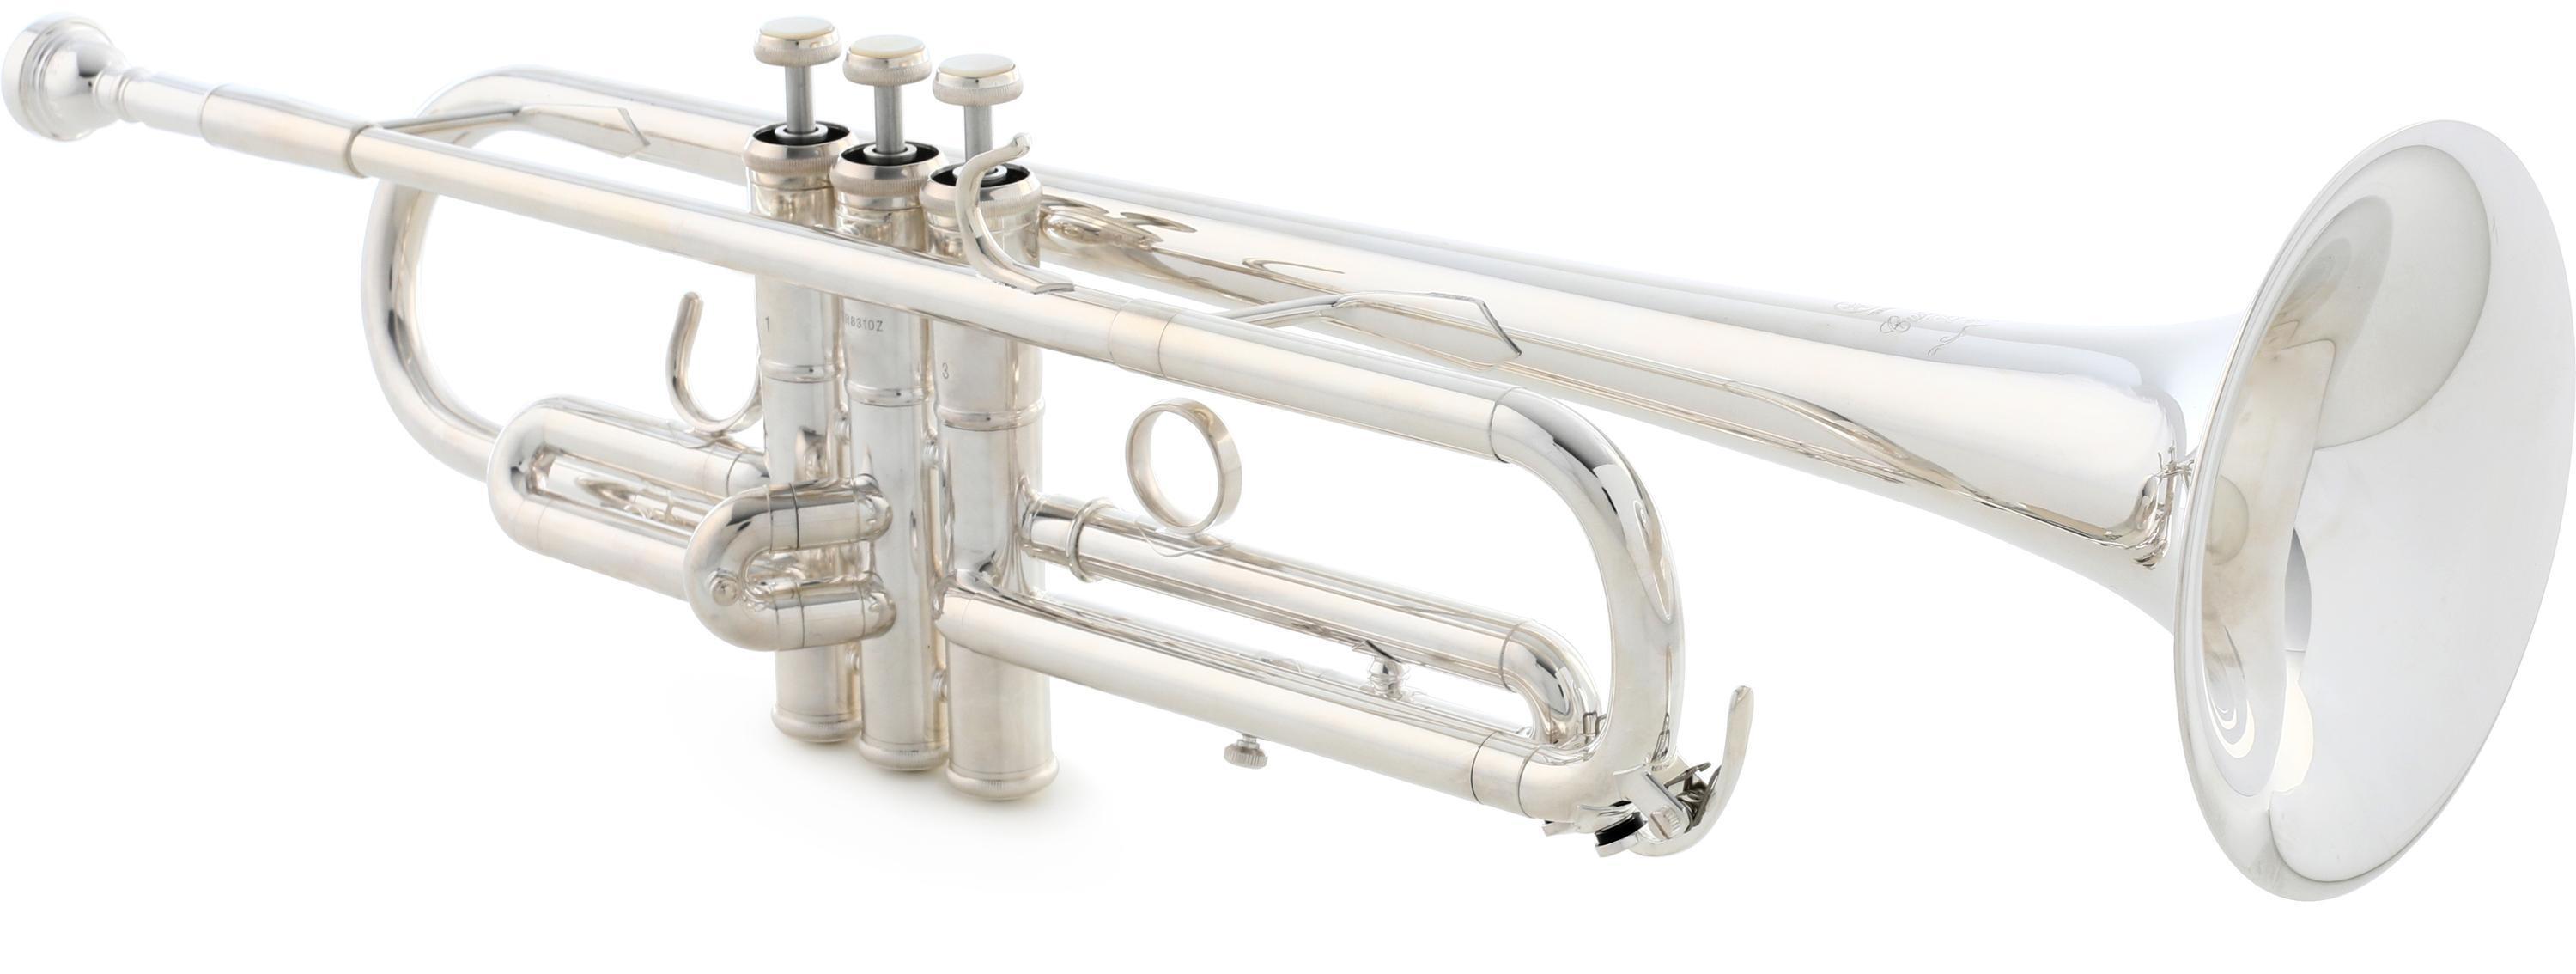 YTR-8310ZIIS Professional Bb Trumpet - Silver Plated - Sweetwater